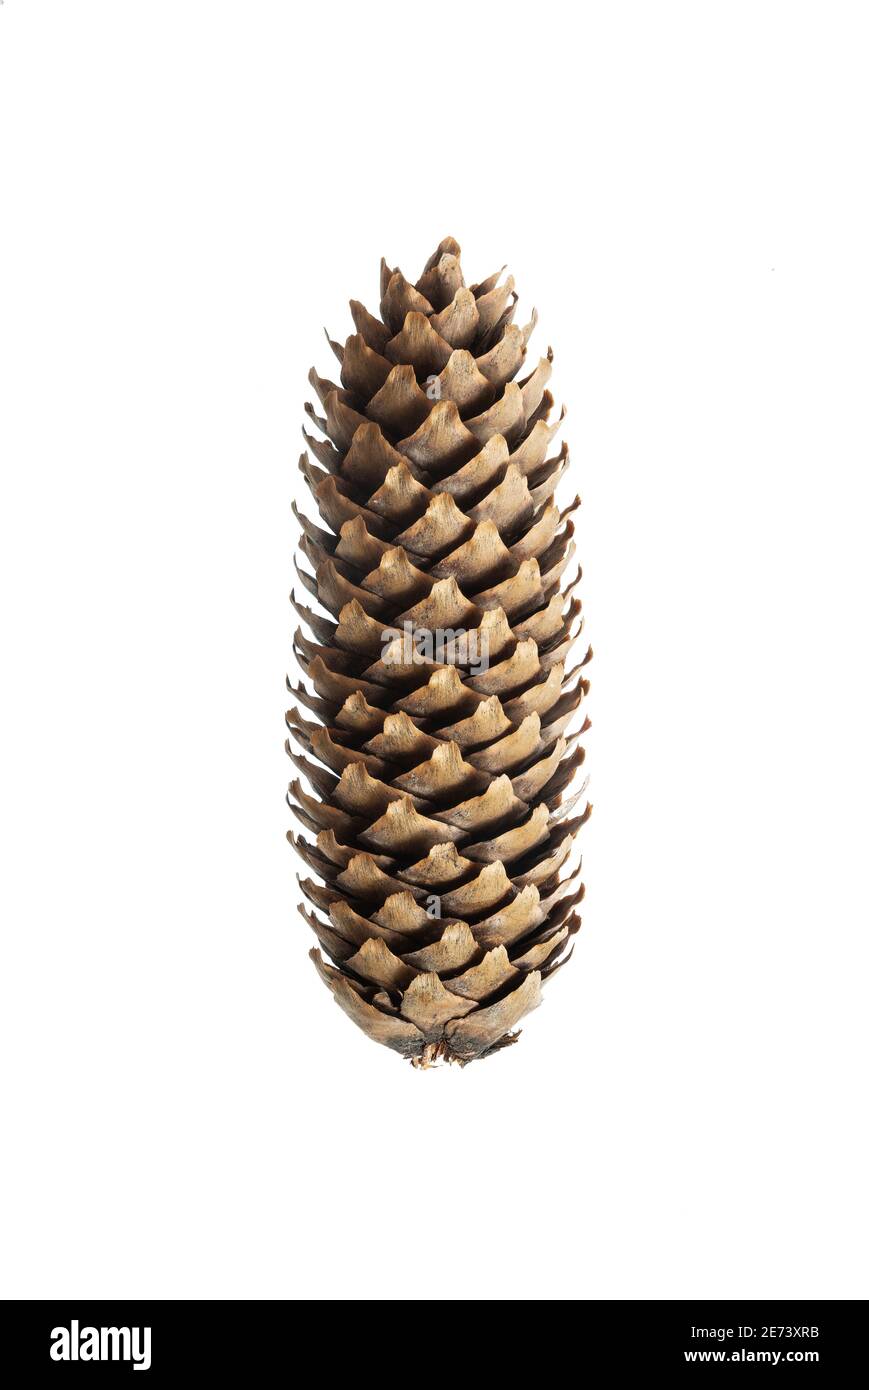 Strobilus of a Norway spruce (Picea abies) Stock Photo